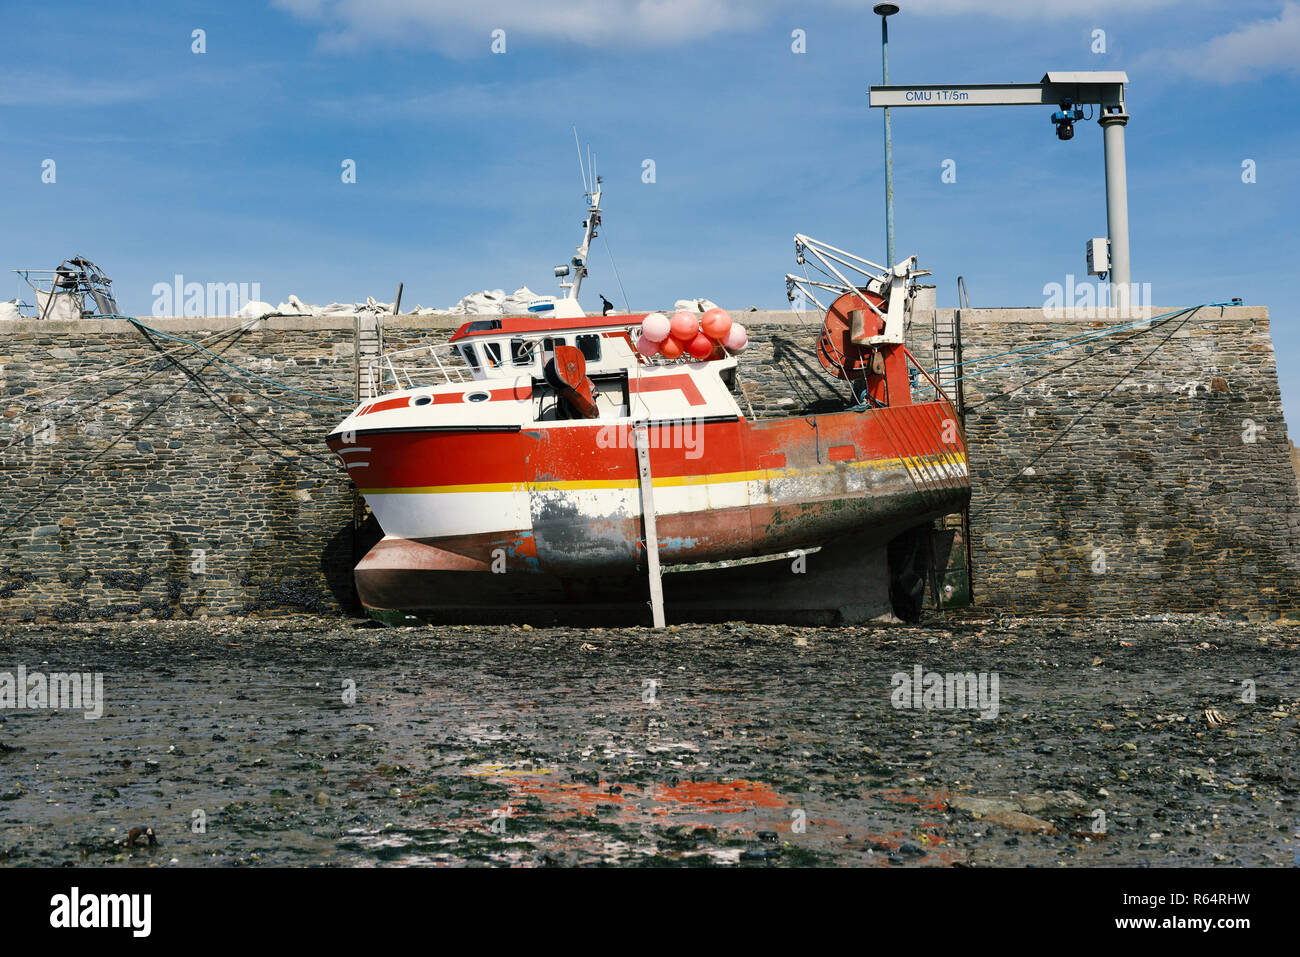 A red fishing boat is on dry ground in the harbor at low tide Stock Photo